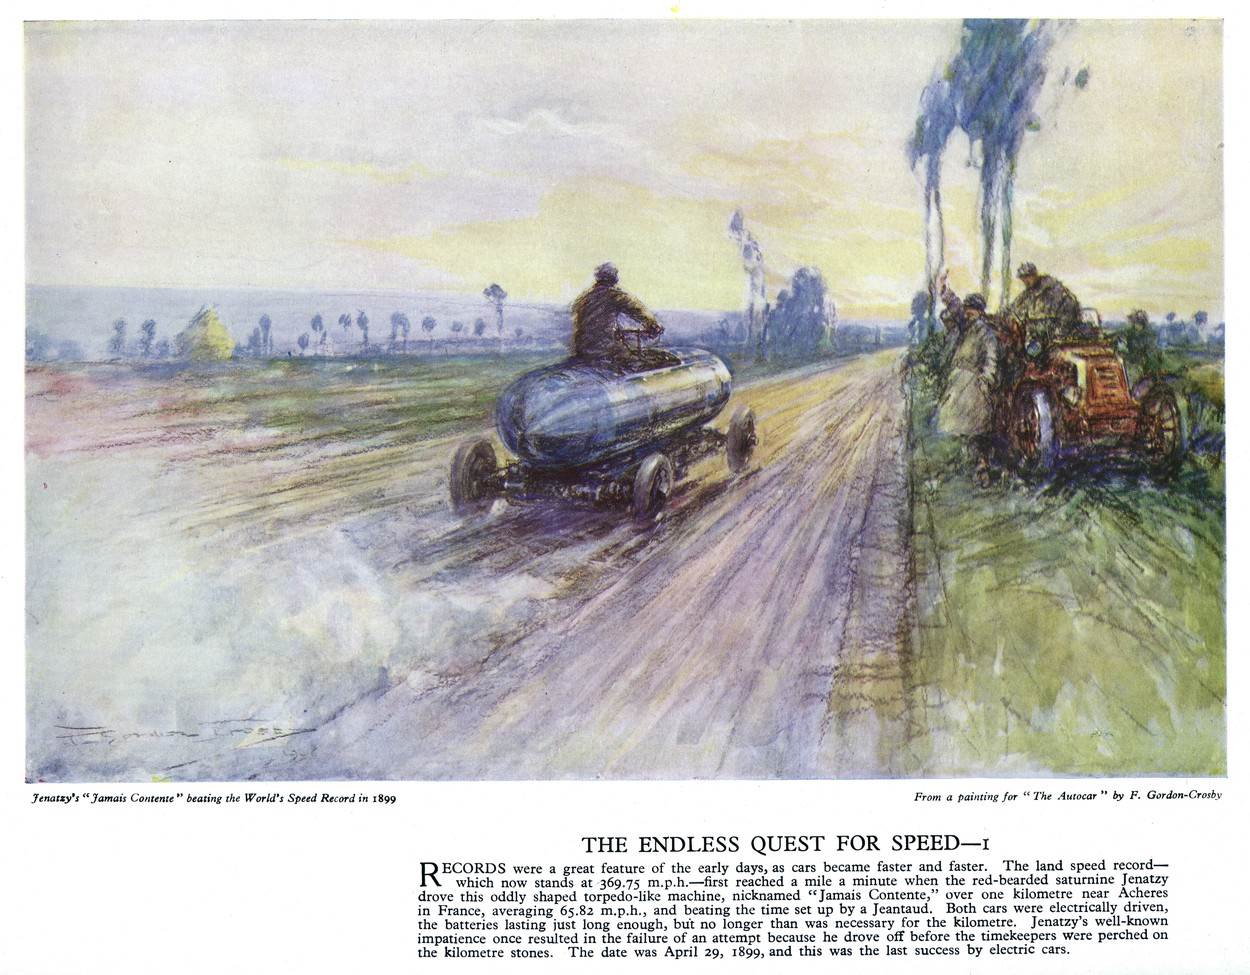  transport;motoring;motor;car;vehicle;frederick;gordon;crosby;speed;autocar;poster;camille;beating;beat;beater;world;record;acheres;france;65;mph;1899;1890s;jenatzy;road;tractor;waving;men;pioneer;jamais;contente;never;content;history;historical 